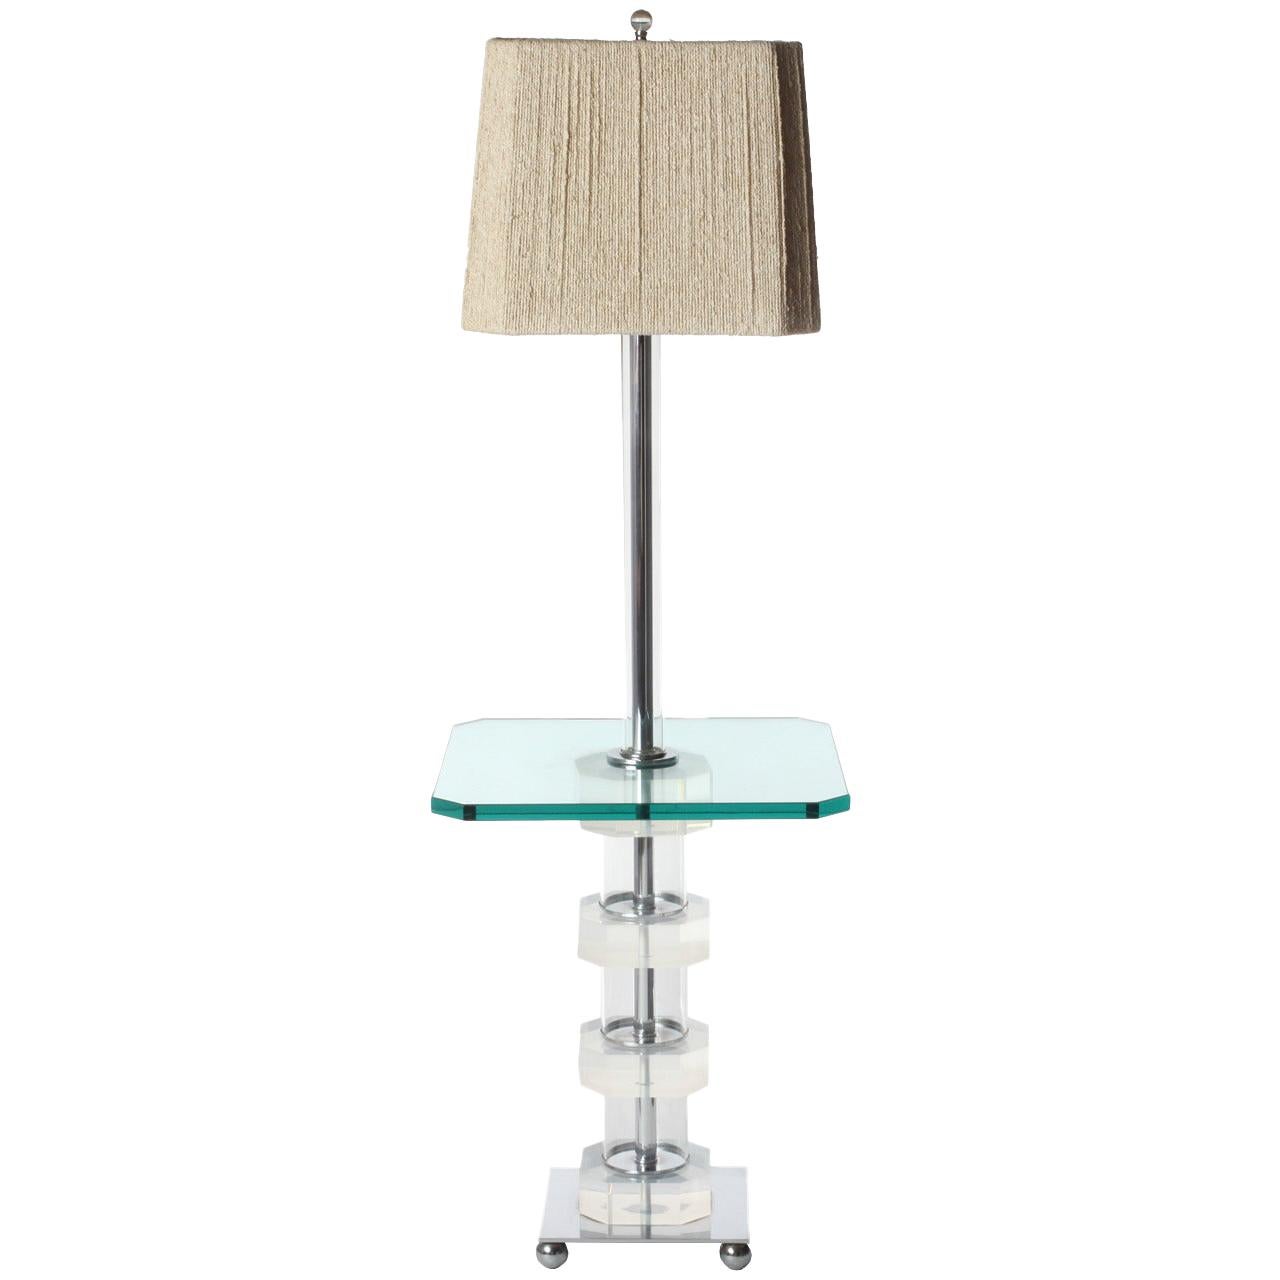 Floor Lamp Table For Sale